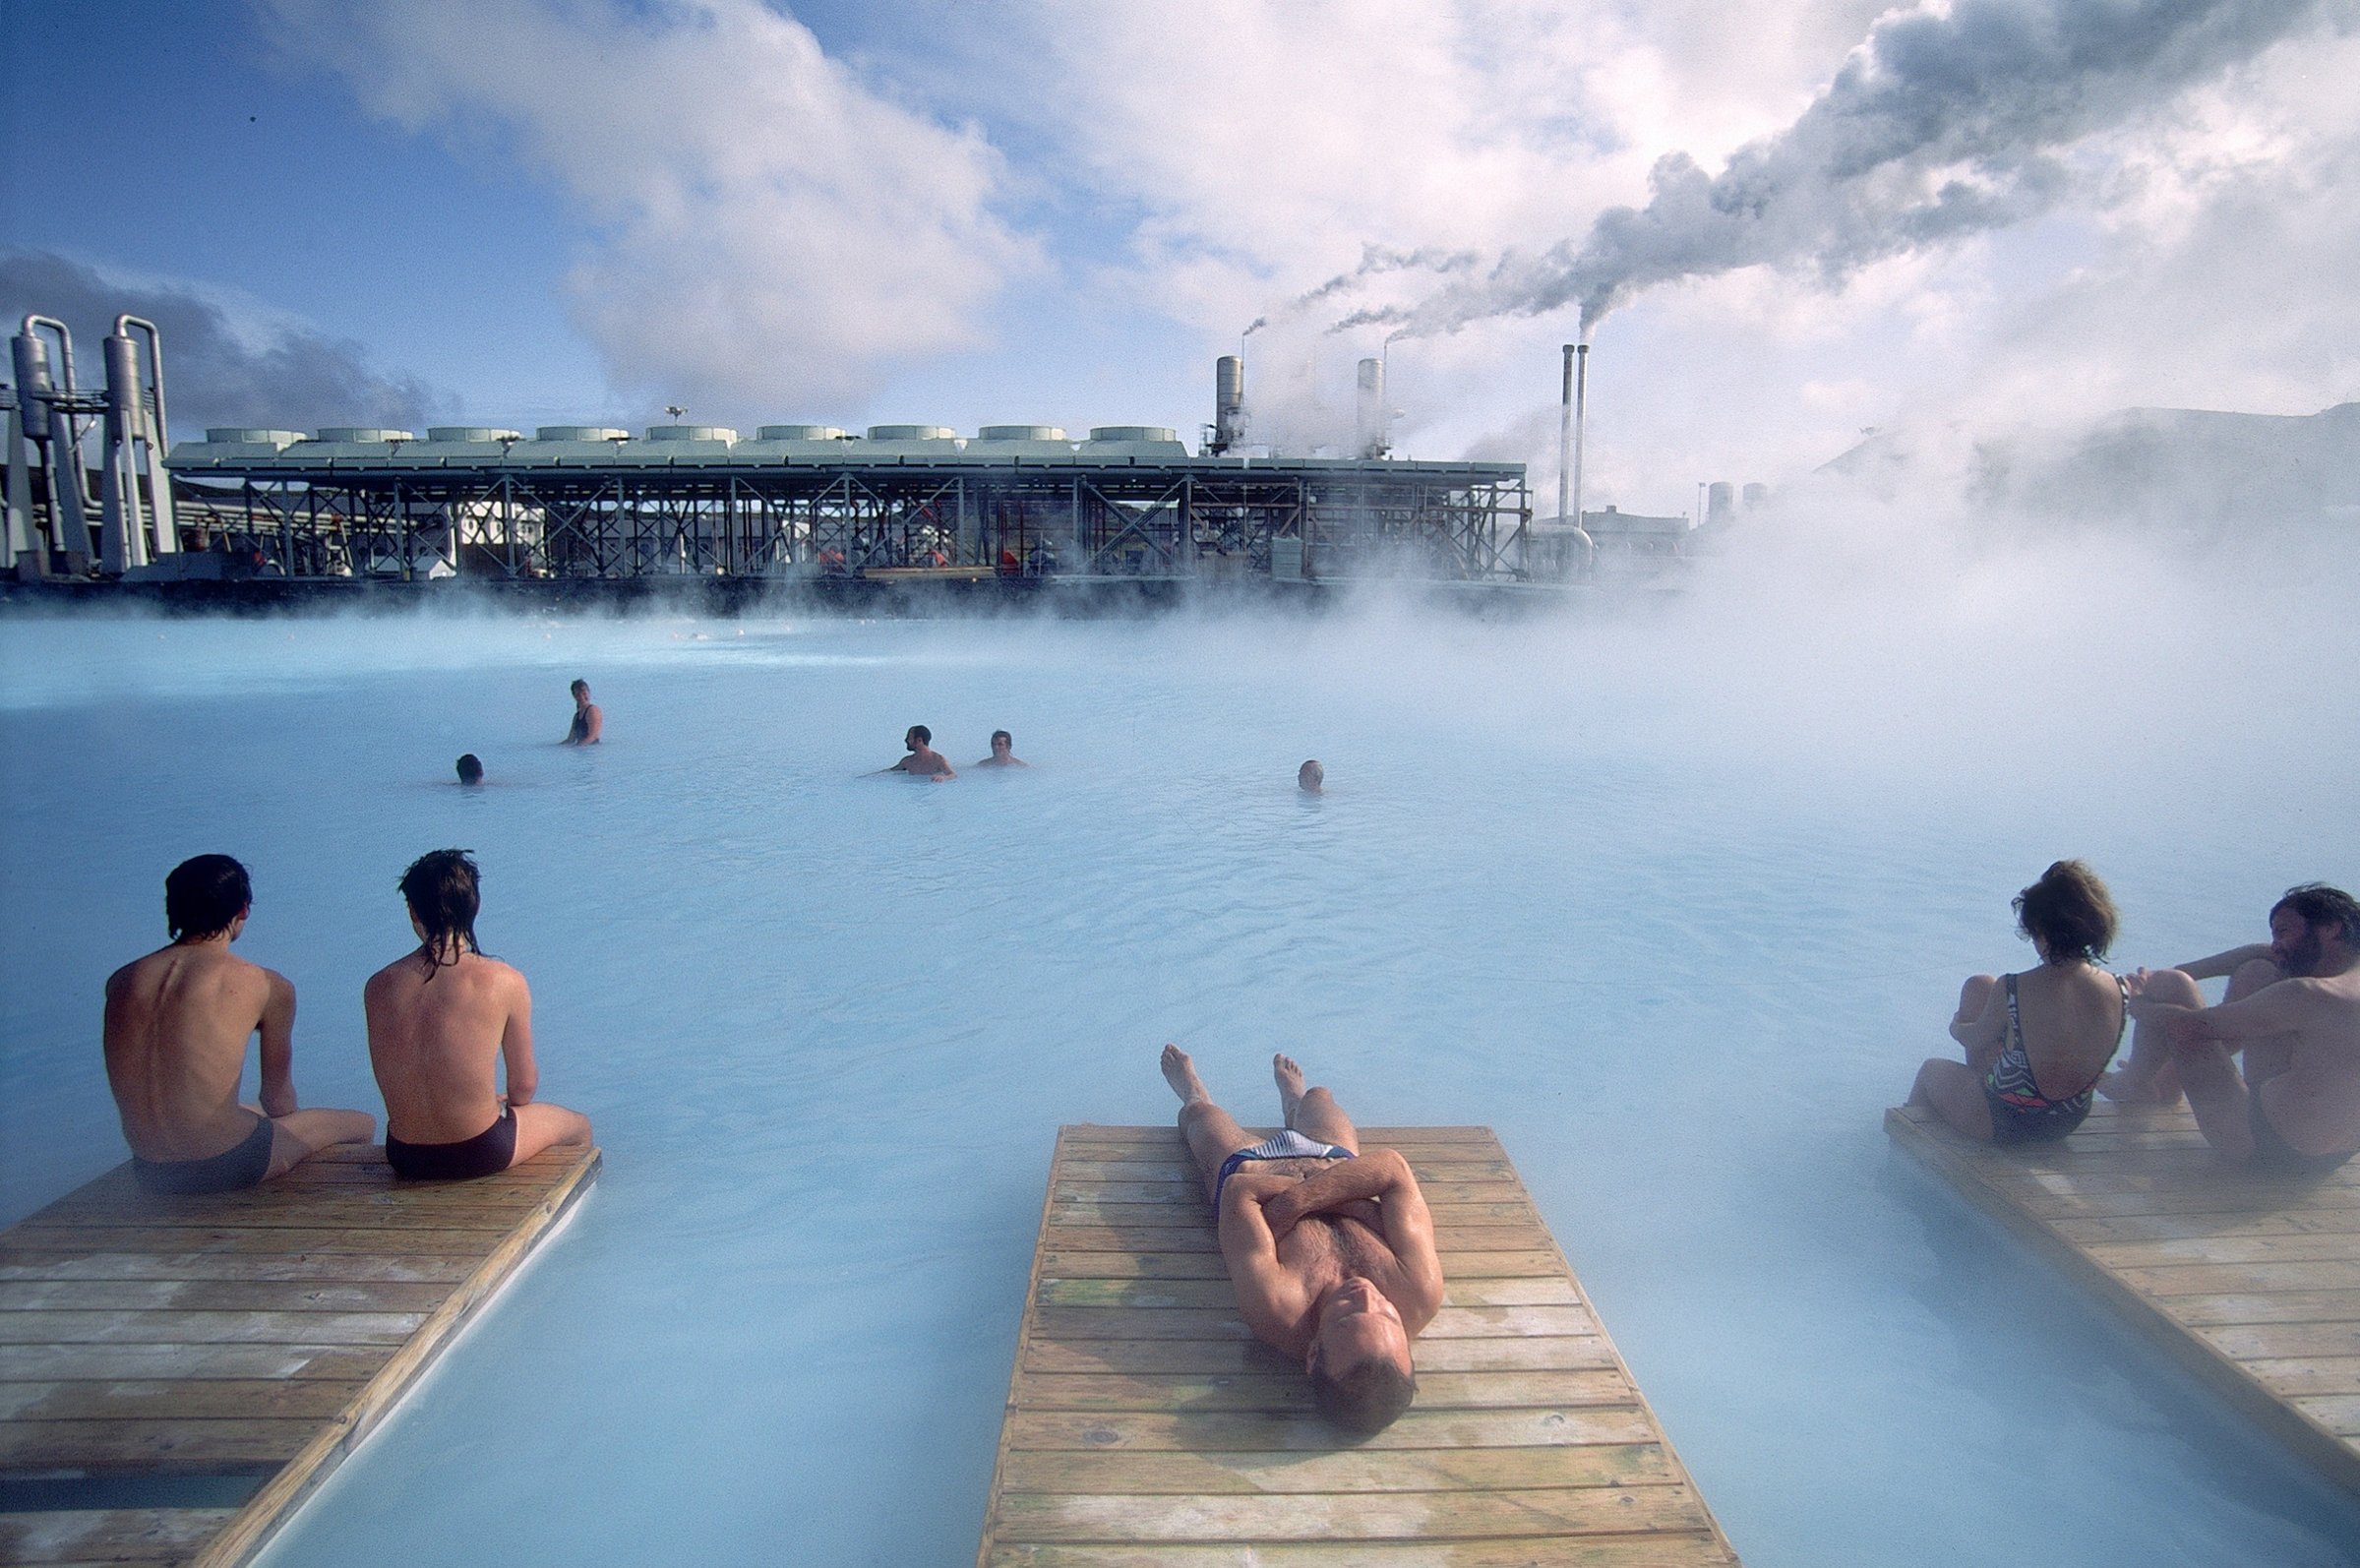 Bathers at the Blue Lagoon thermal bath in Reykjanes, Iceland.